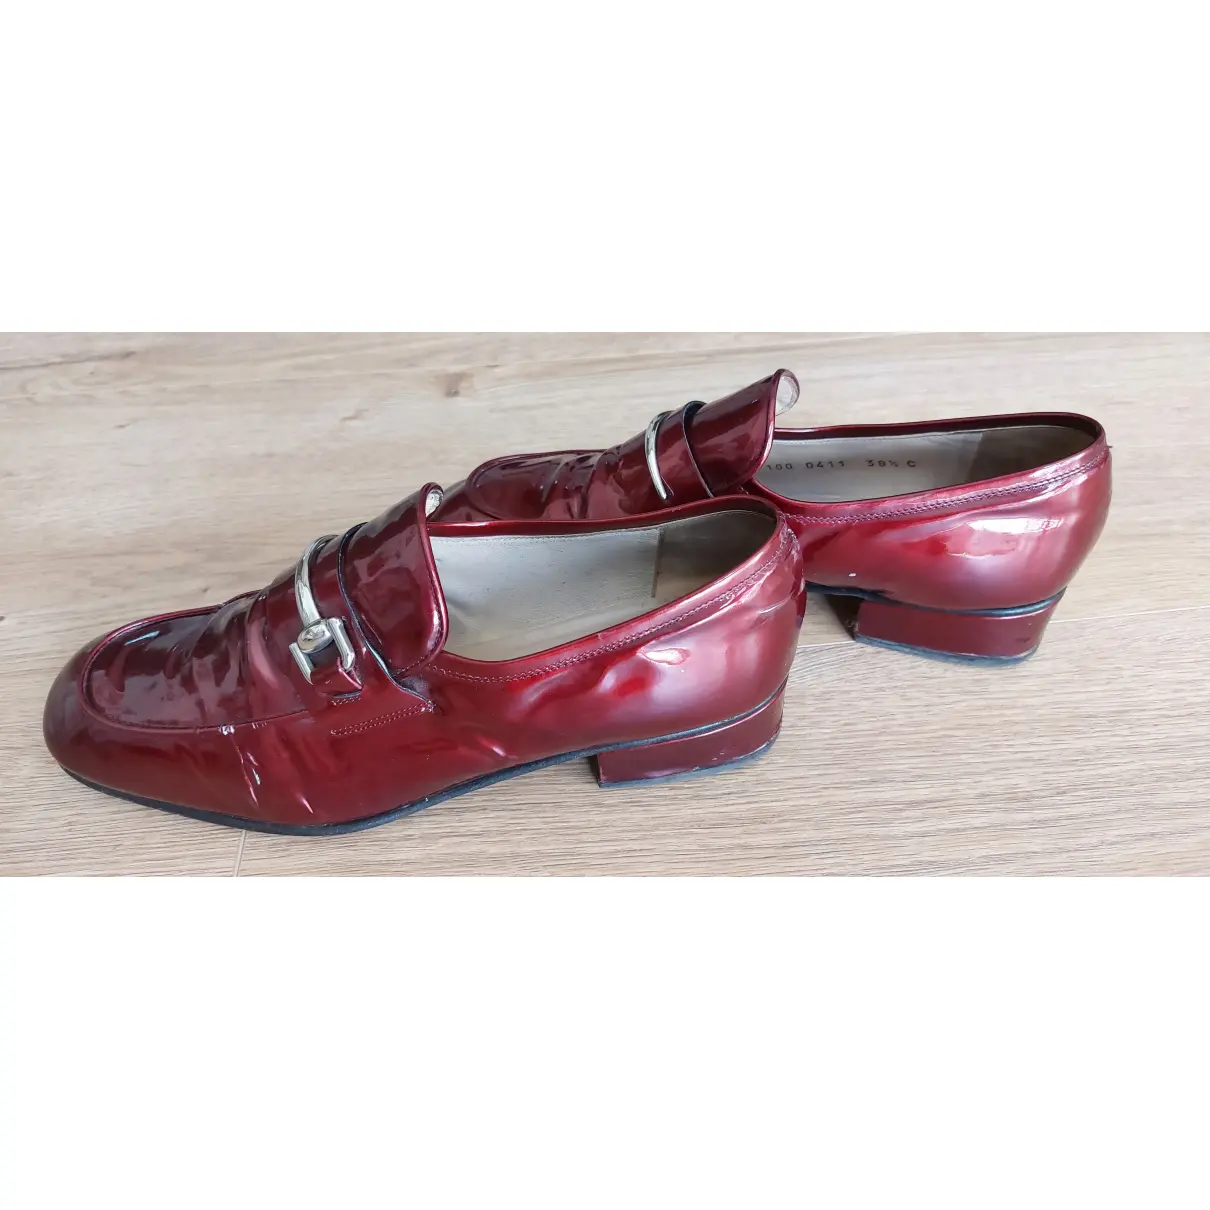 Patent leather flats Gucci - Vintage